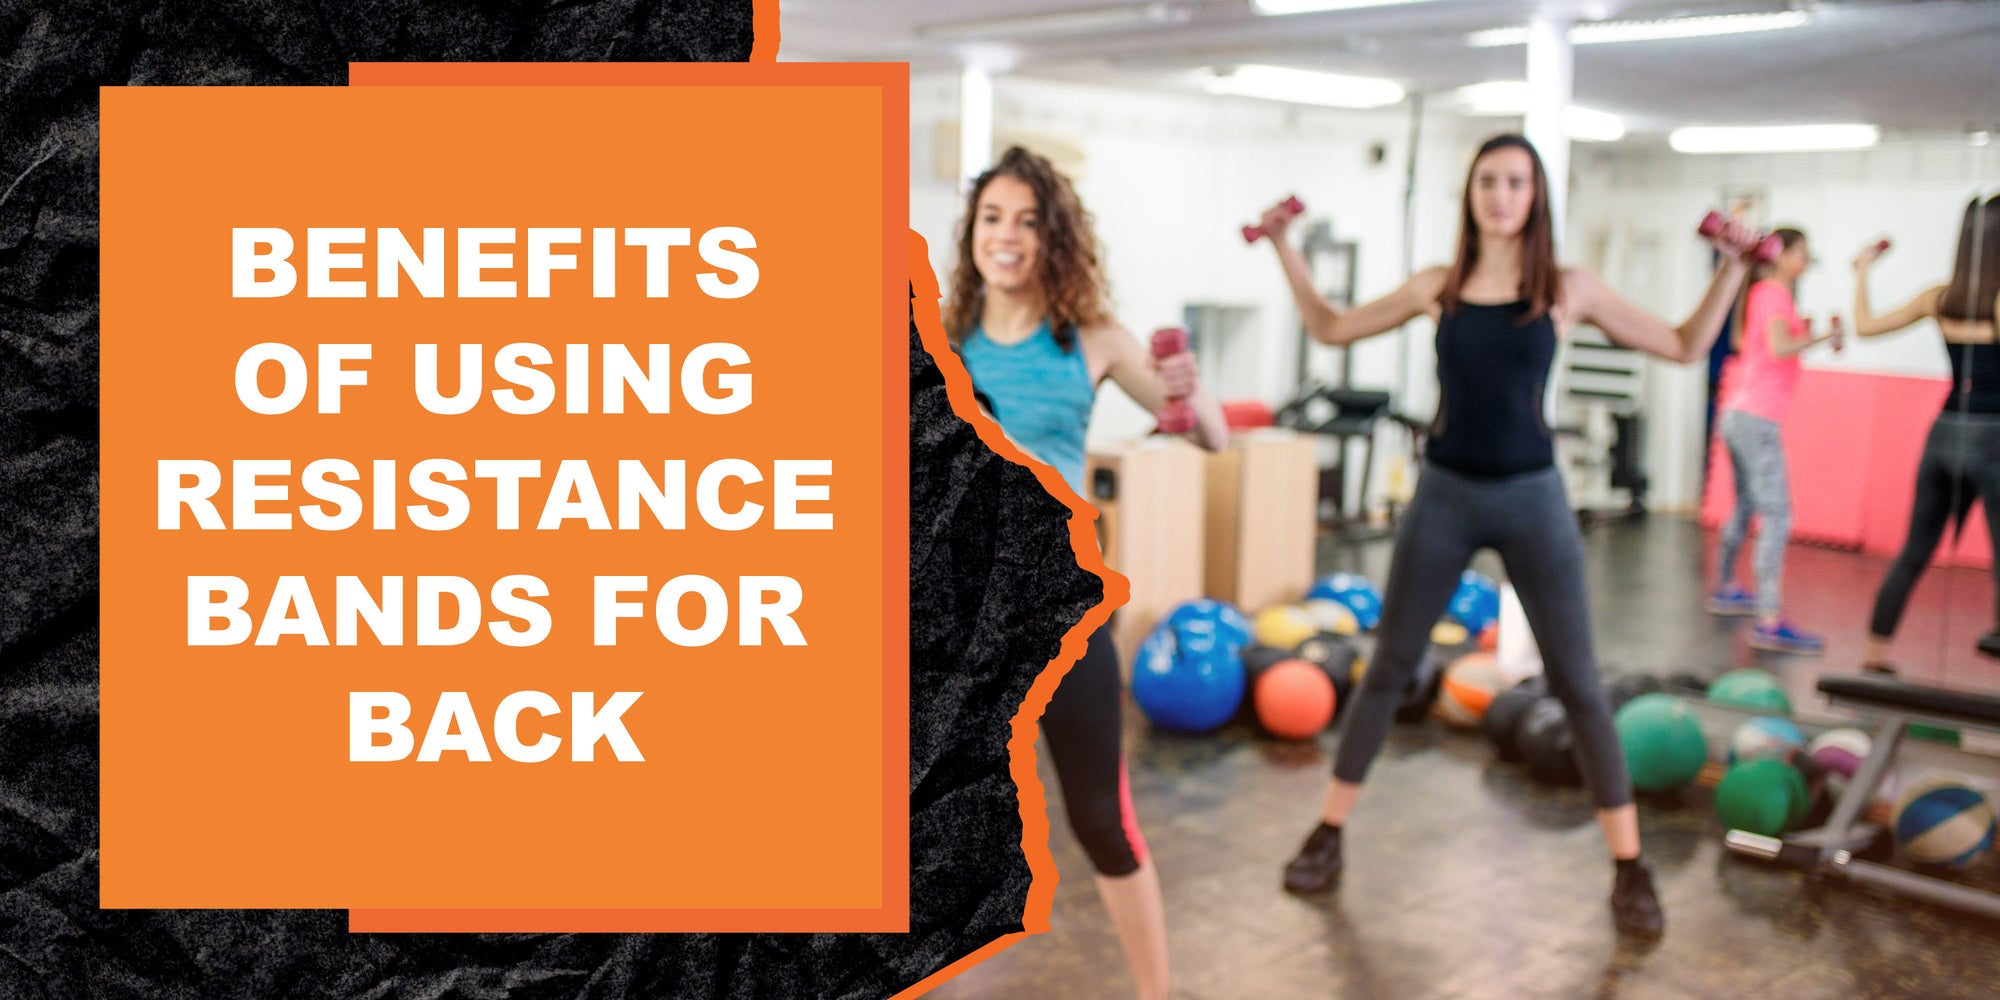 The Benefits of Using Resistance Bands for Back Training